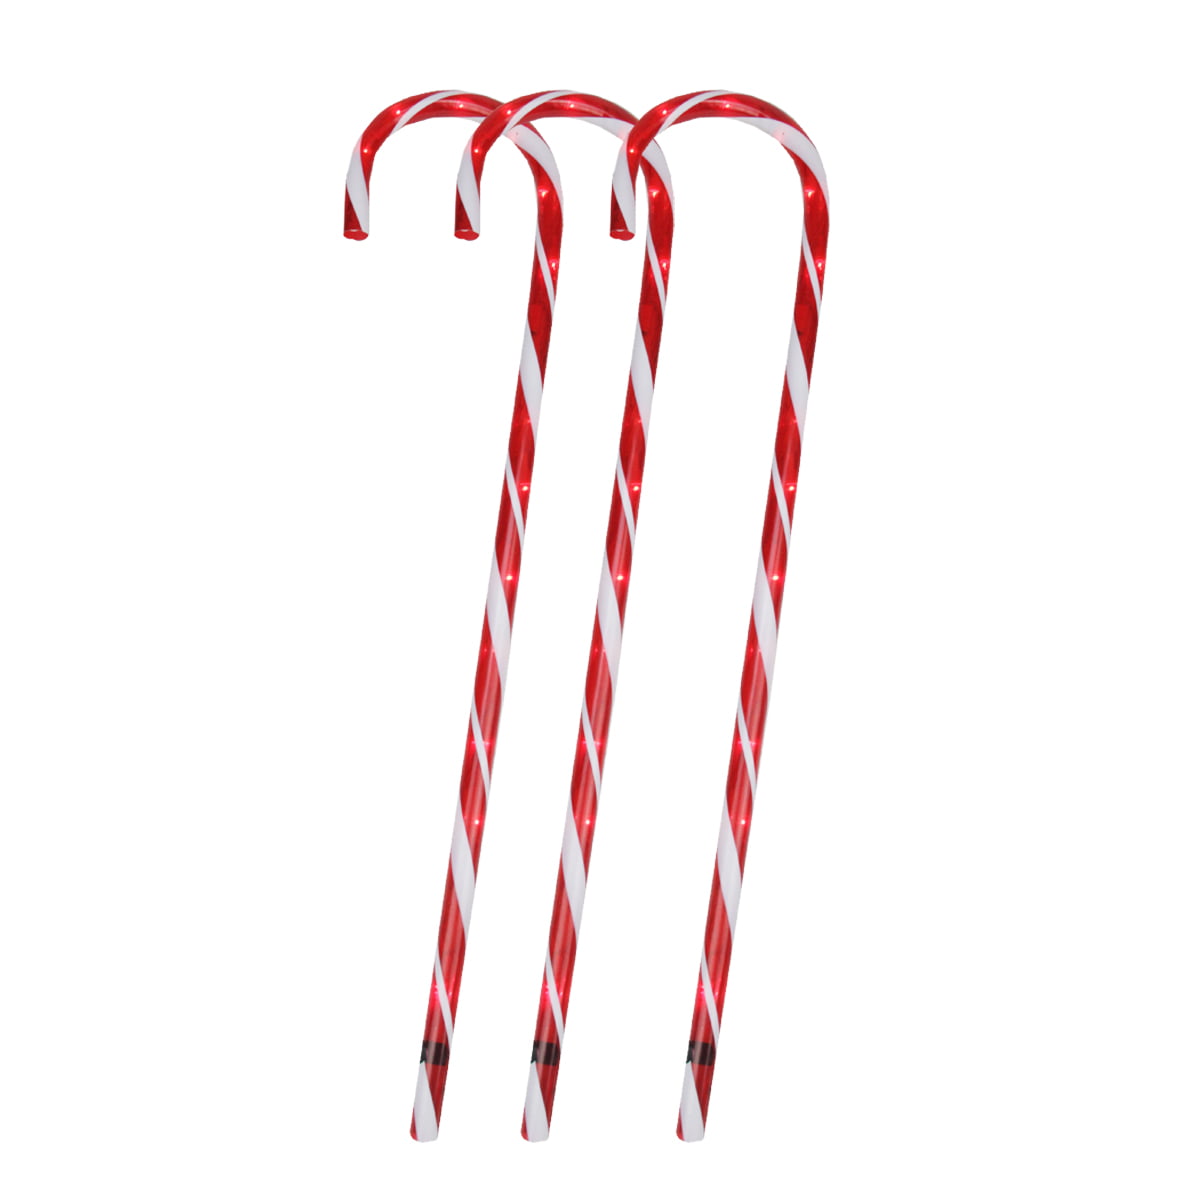 Candy Cane Lights Outdoor Pathway Christmas LED Yard Lawn Pathway Markers Christmas Indoor and Outdoor Decoration Lights UL588 Certified,18ft Length Pathway Markers Candy Christmas Lights White